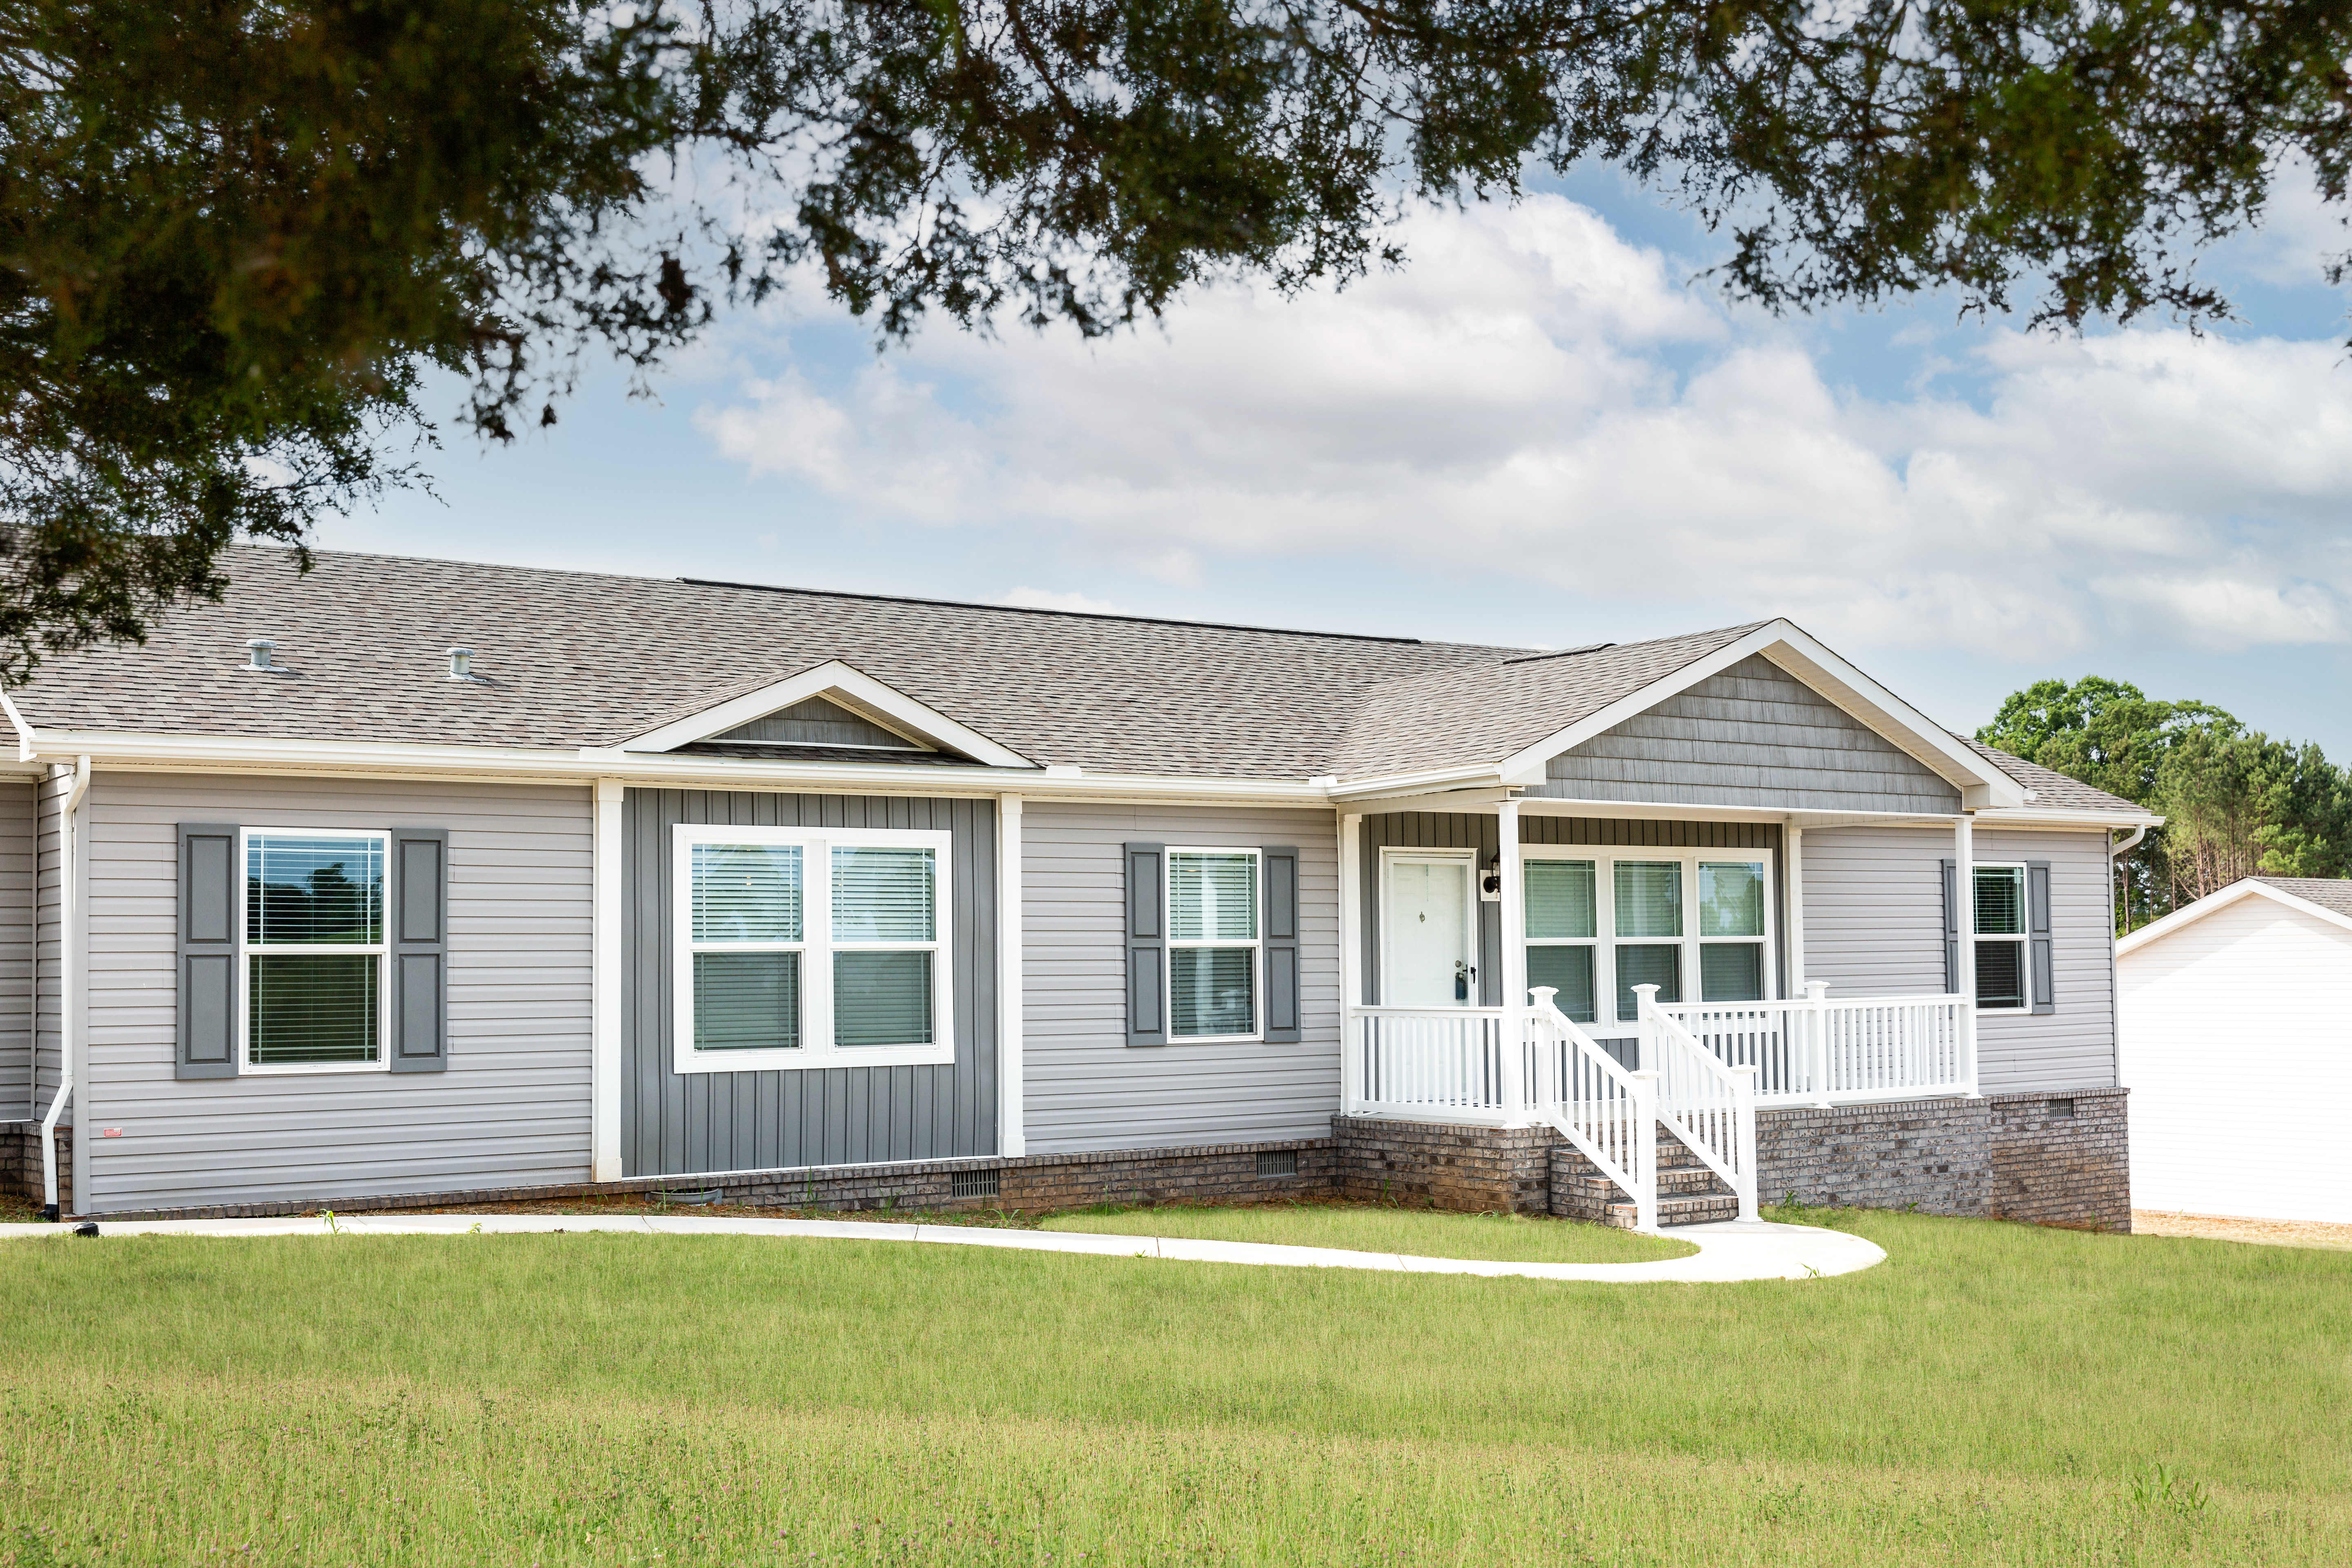 27 Items Checklist Before Buying a Mobile Home in 2022